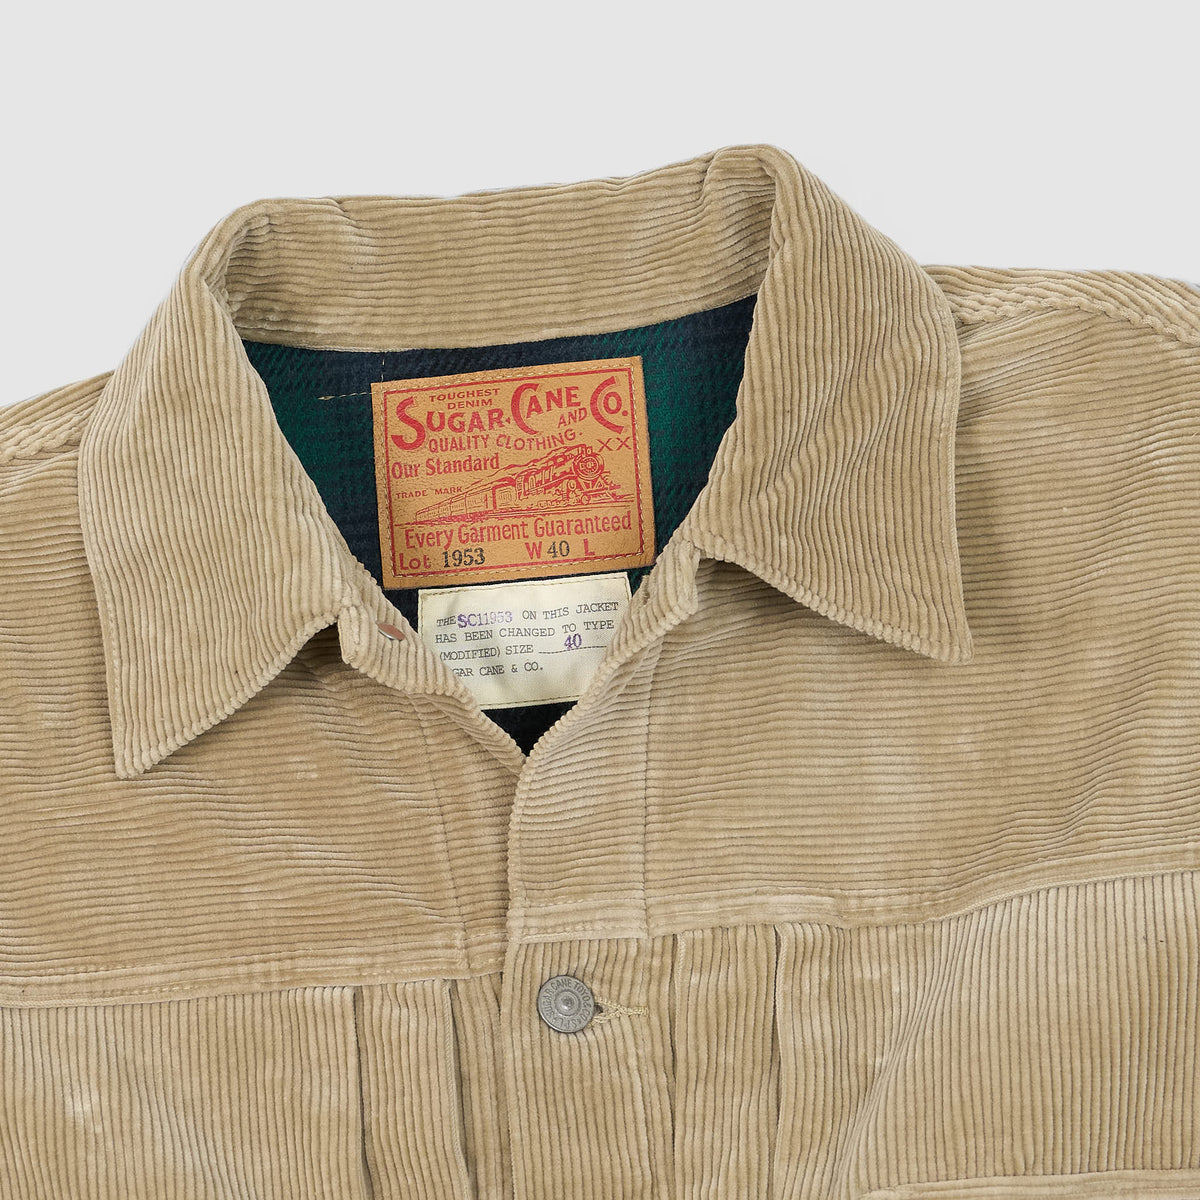 Sugar Cane Lined Corduroy Type Two Plaid Cotton Flannel Jacket